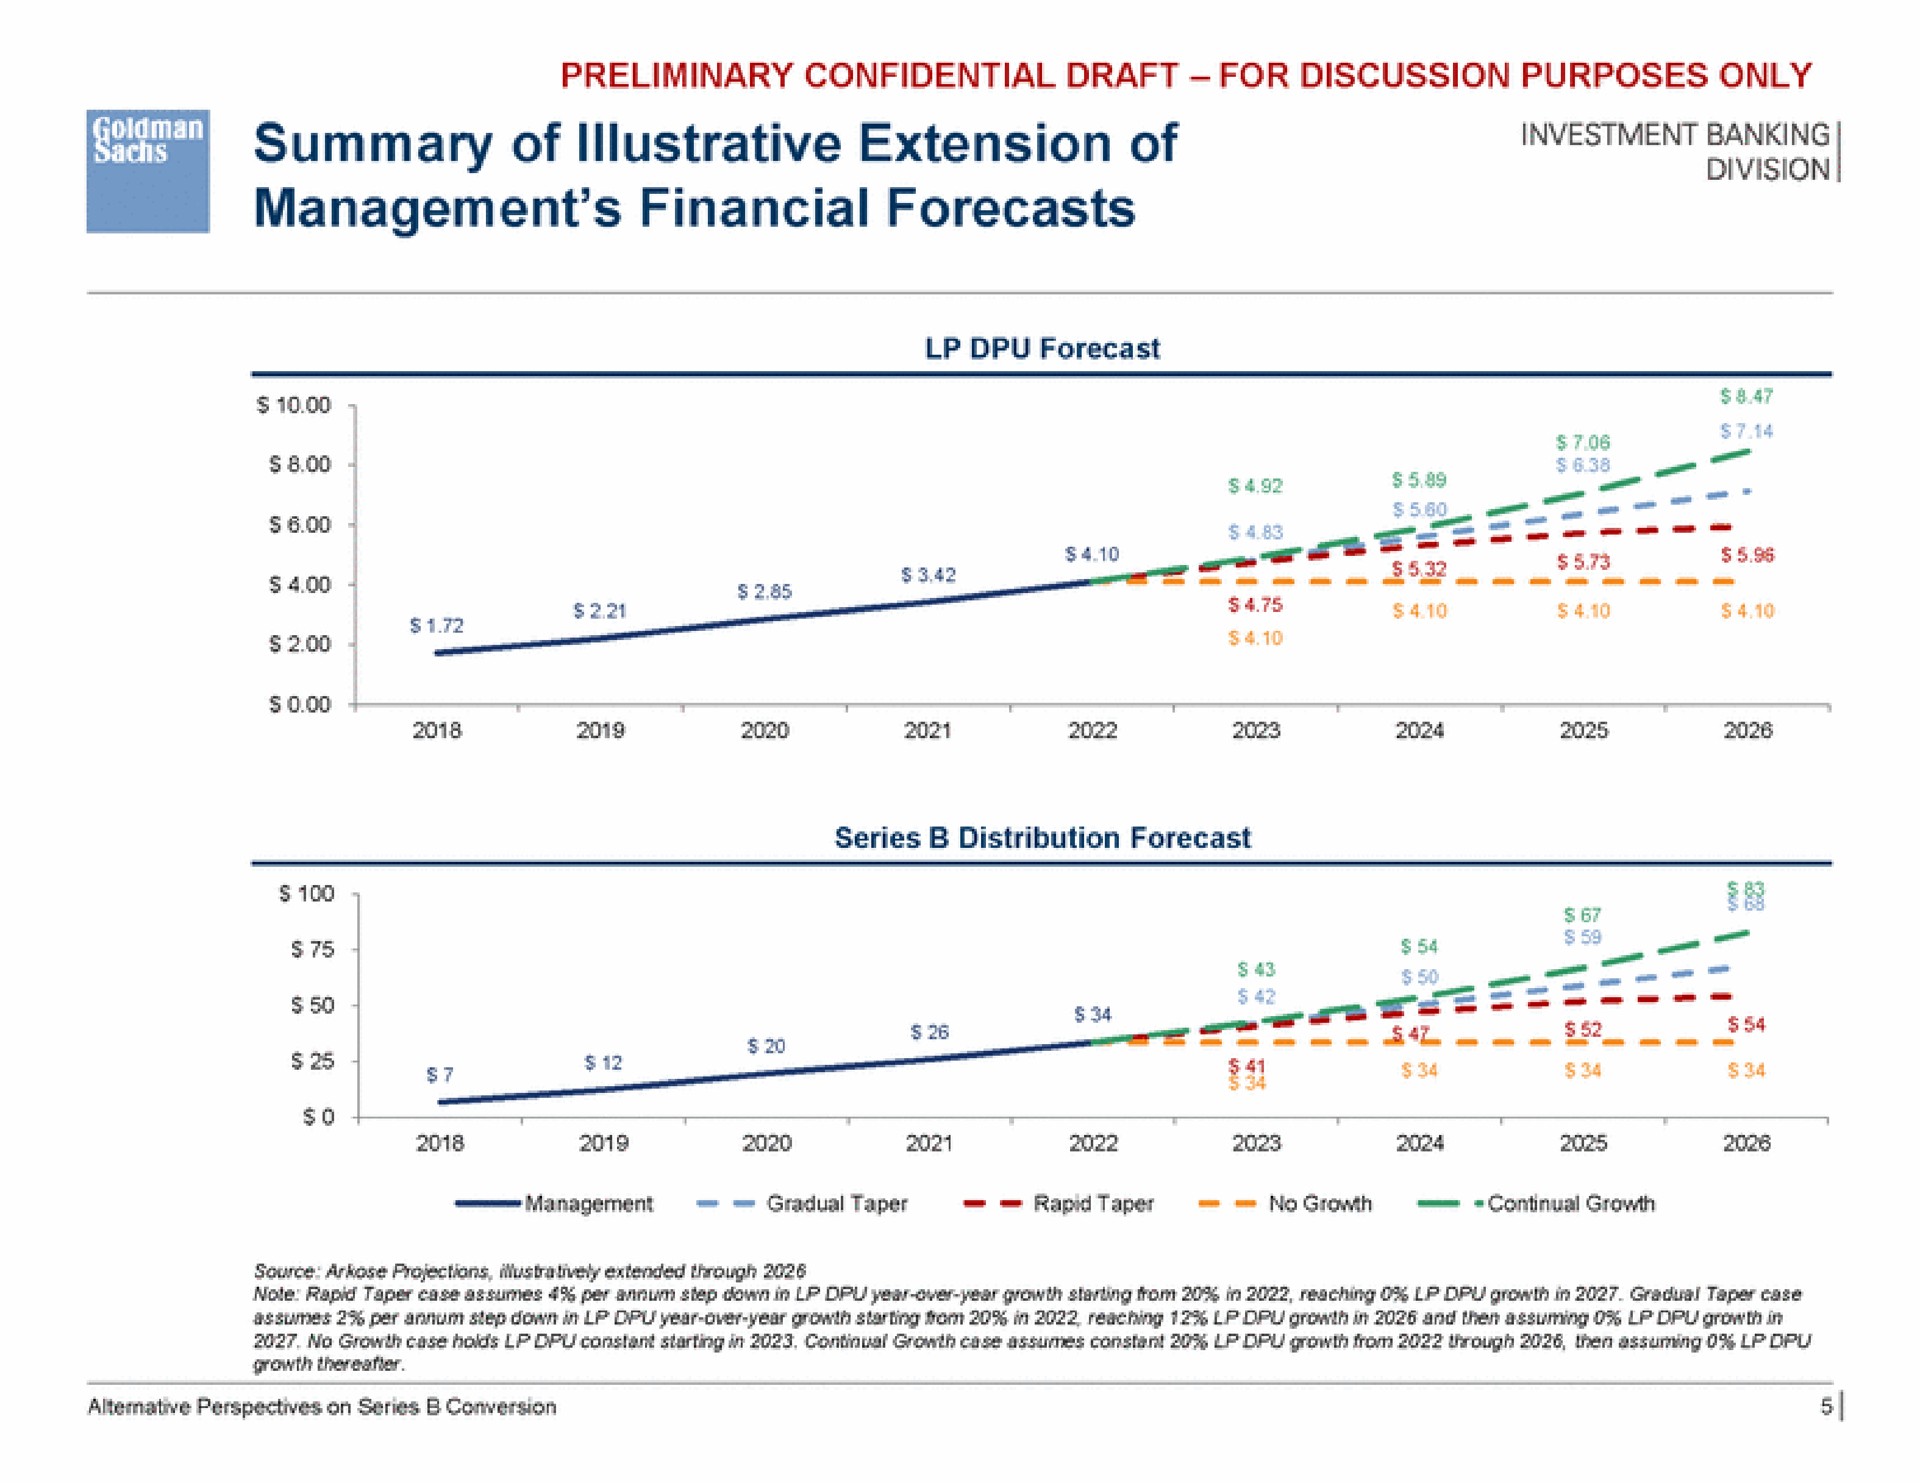 summary of illustrative extension of investment banking management financial forecasts | Goldman Sachs